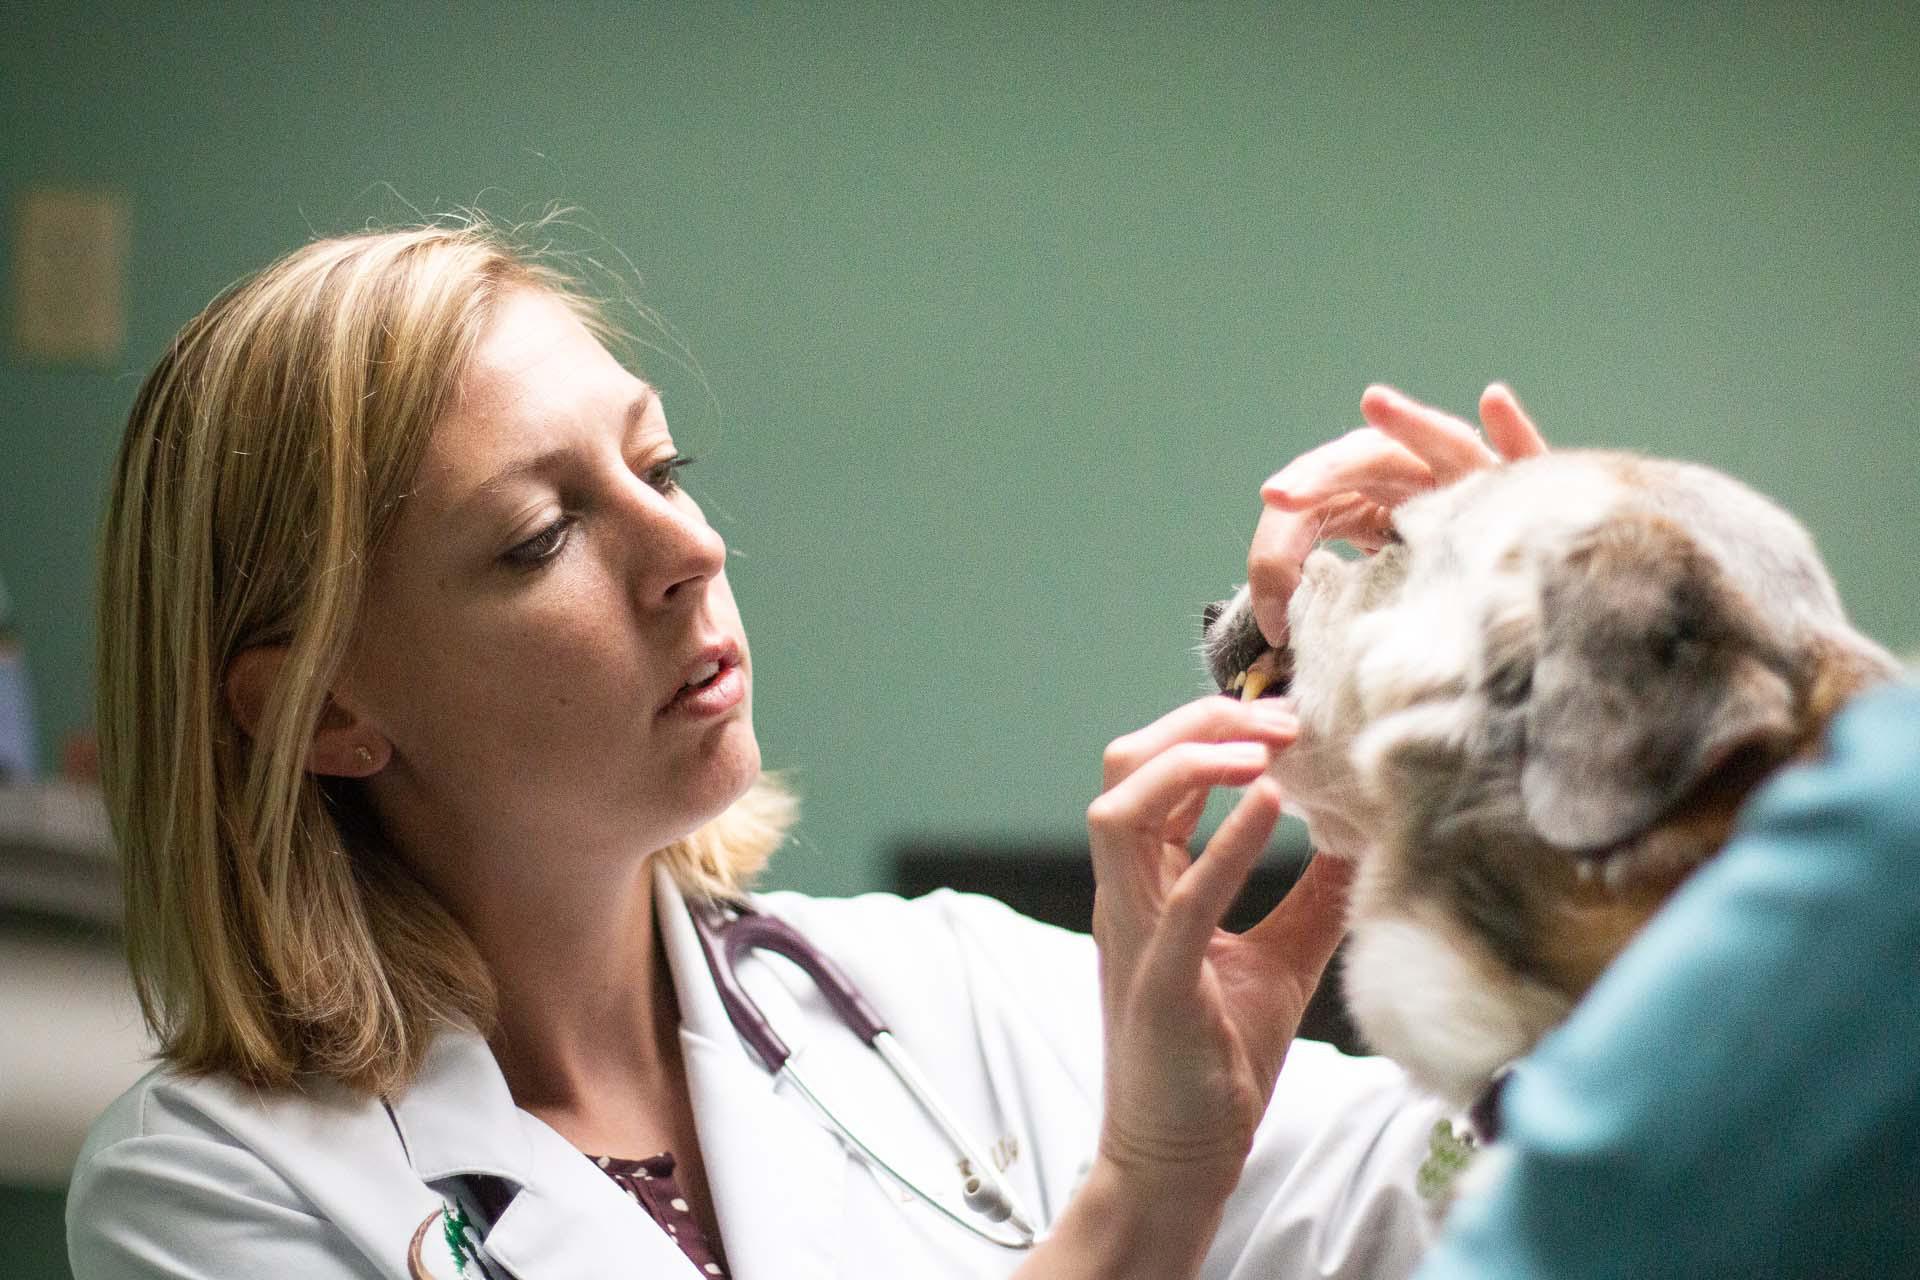 Part of your pets physical includes an oral exam. Did you know dental disease is about more than doggy breath, it’s about your pet’s complete health! Oral bacteria puts pets at risk for painful teeth and gums, and more serious issues like organ damage.